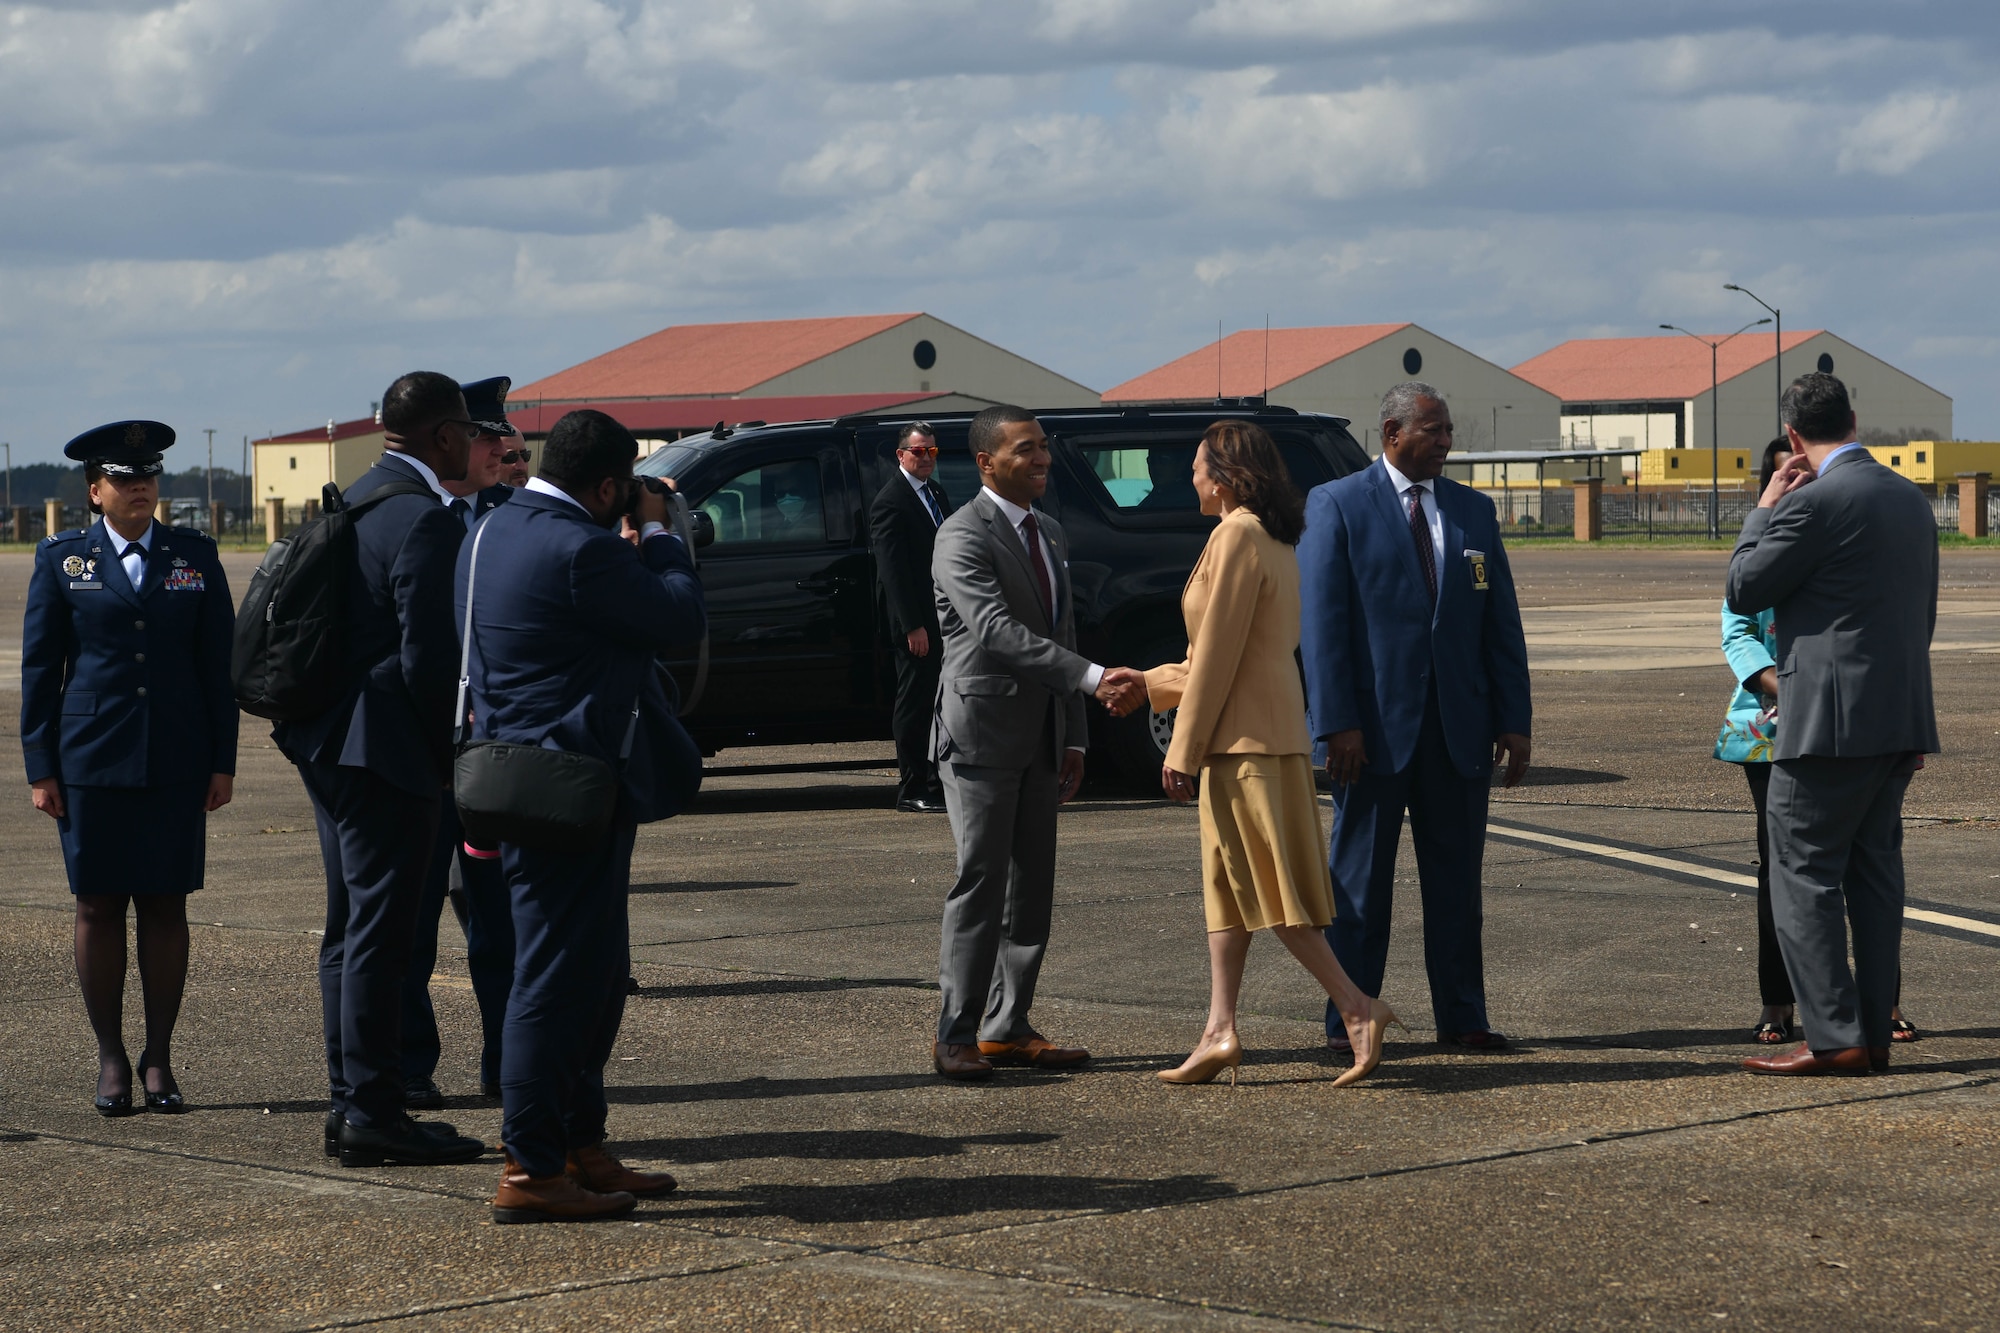 Mayor Steven Reed, Mayor of Montgomery, greets Vice President Kamala Harris on Maxwell Air Force Base, Alabama March 6, 2022. Harris visited Alabama to commemorate the 57th anniversary of Bloody Sunday, a civil rights march that turned to tragedy. (U.S. Air Force photo by Senior Airman Jackson Manske)